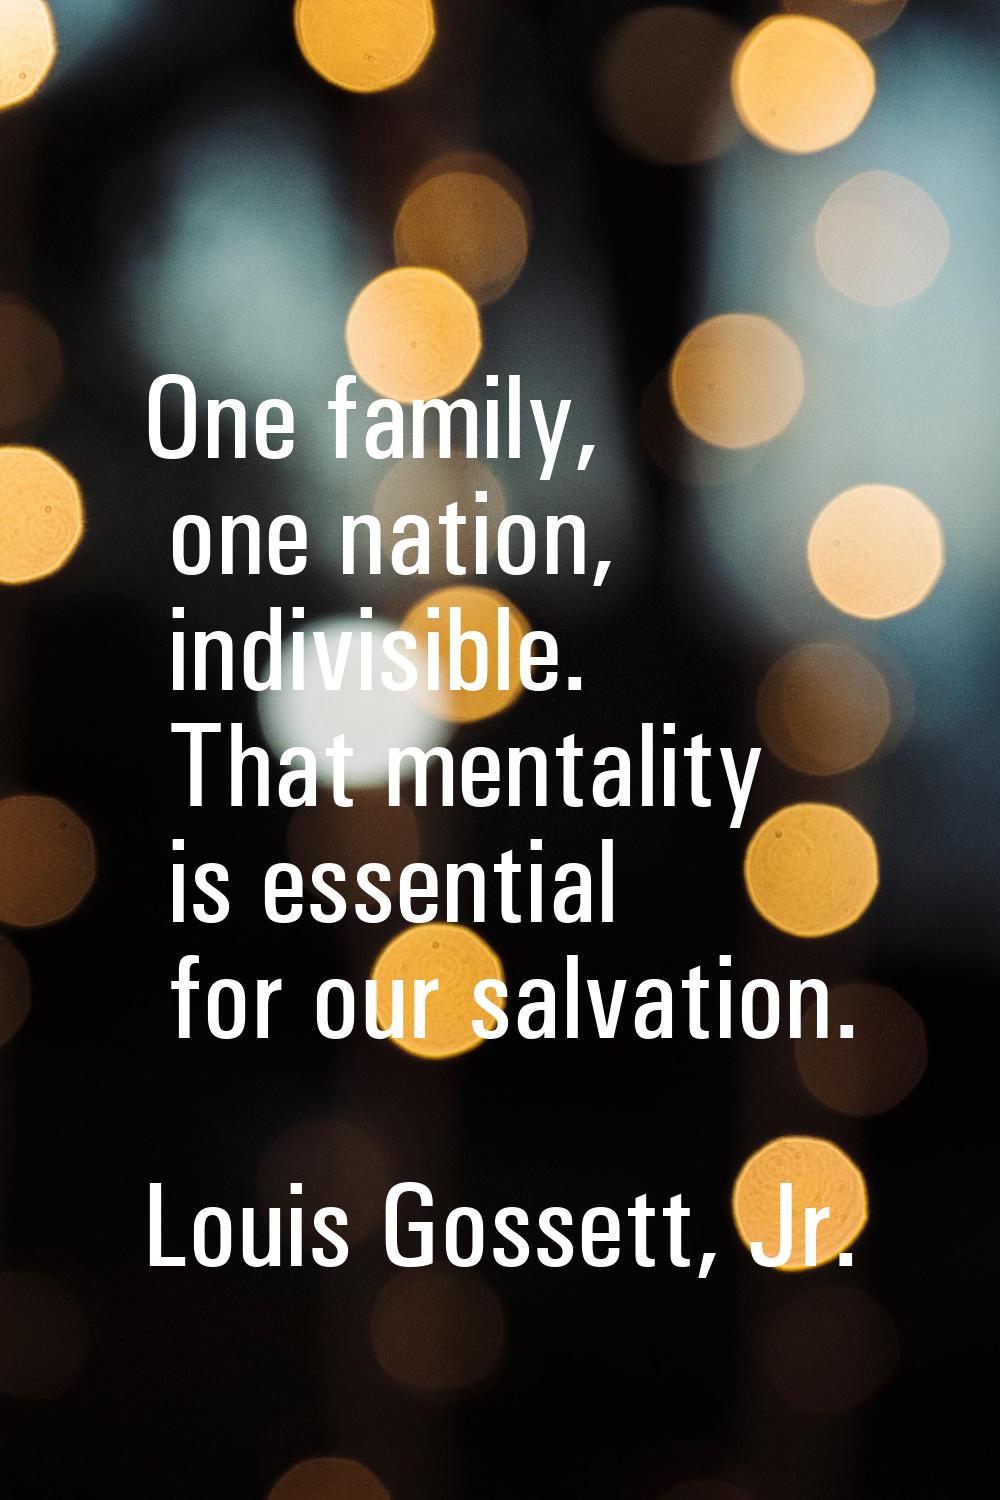 One family, one nation, indivisible. That mentality is essential for our salvation.